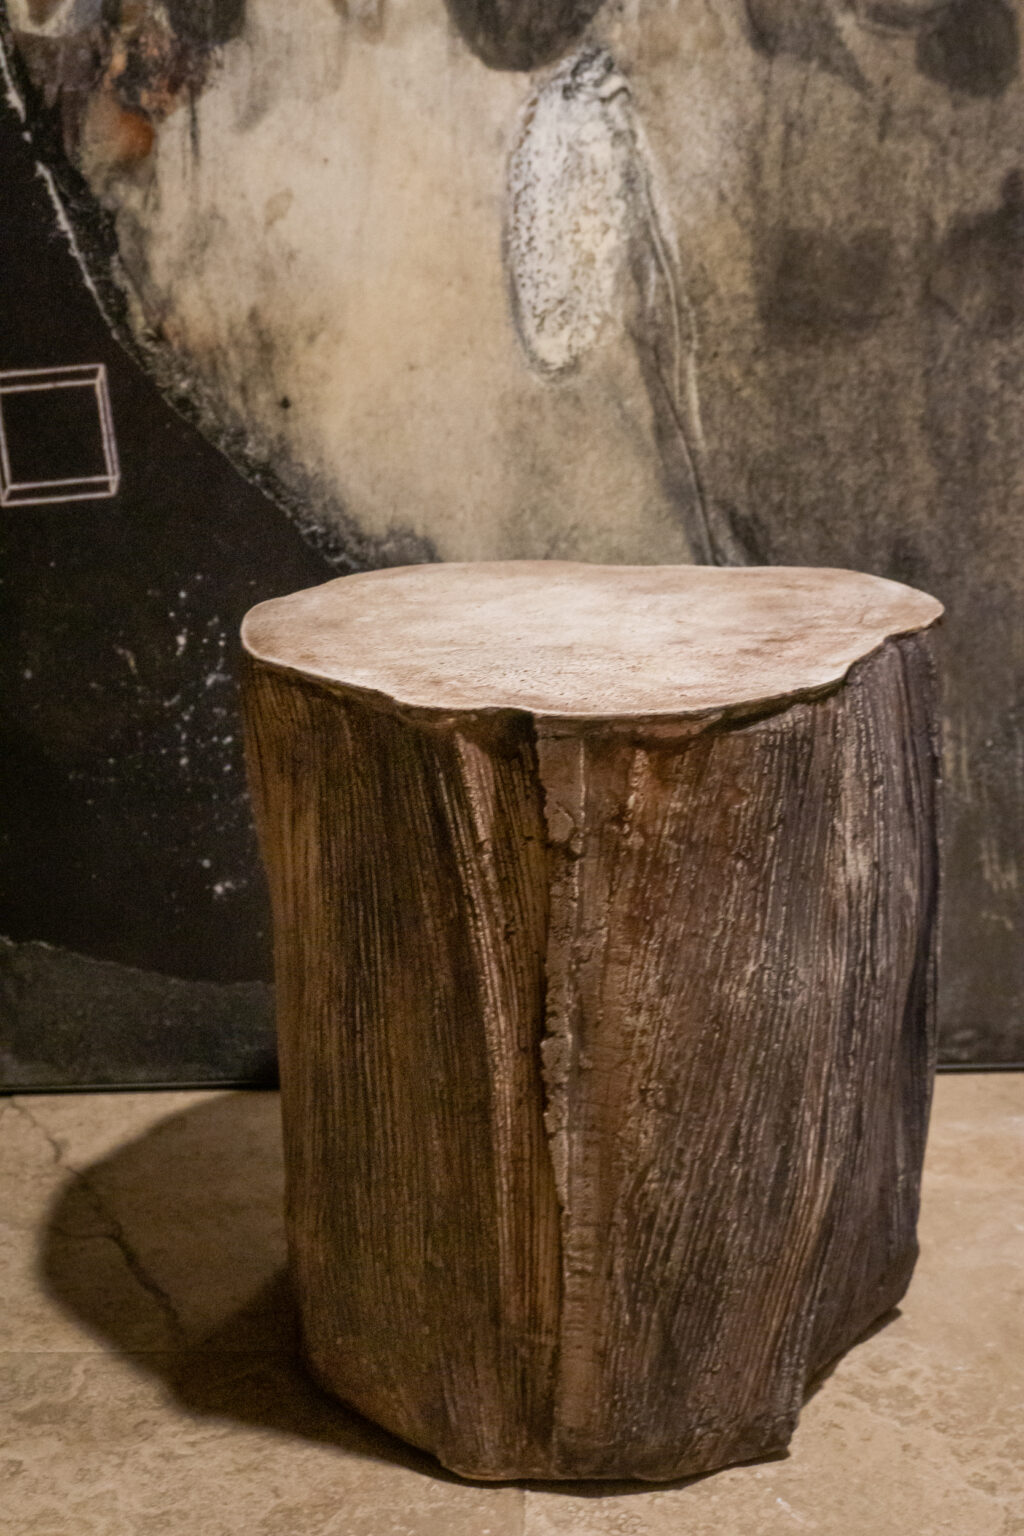 Small sculptural concrete table with palm seedpod texture in brown with abstract painting in background